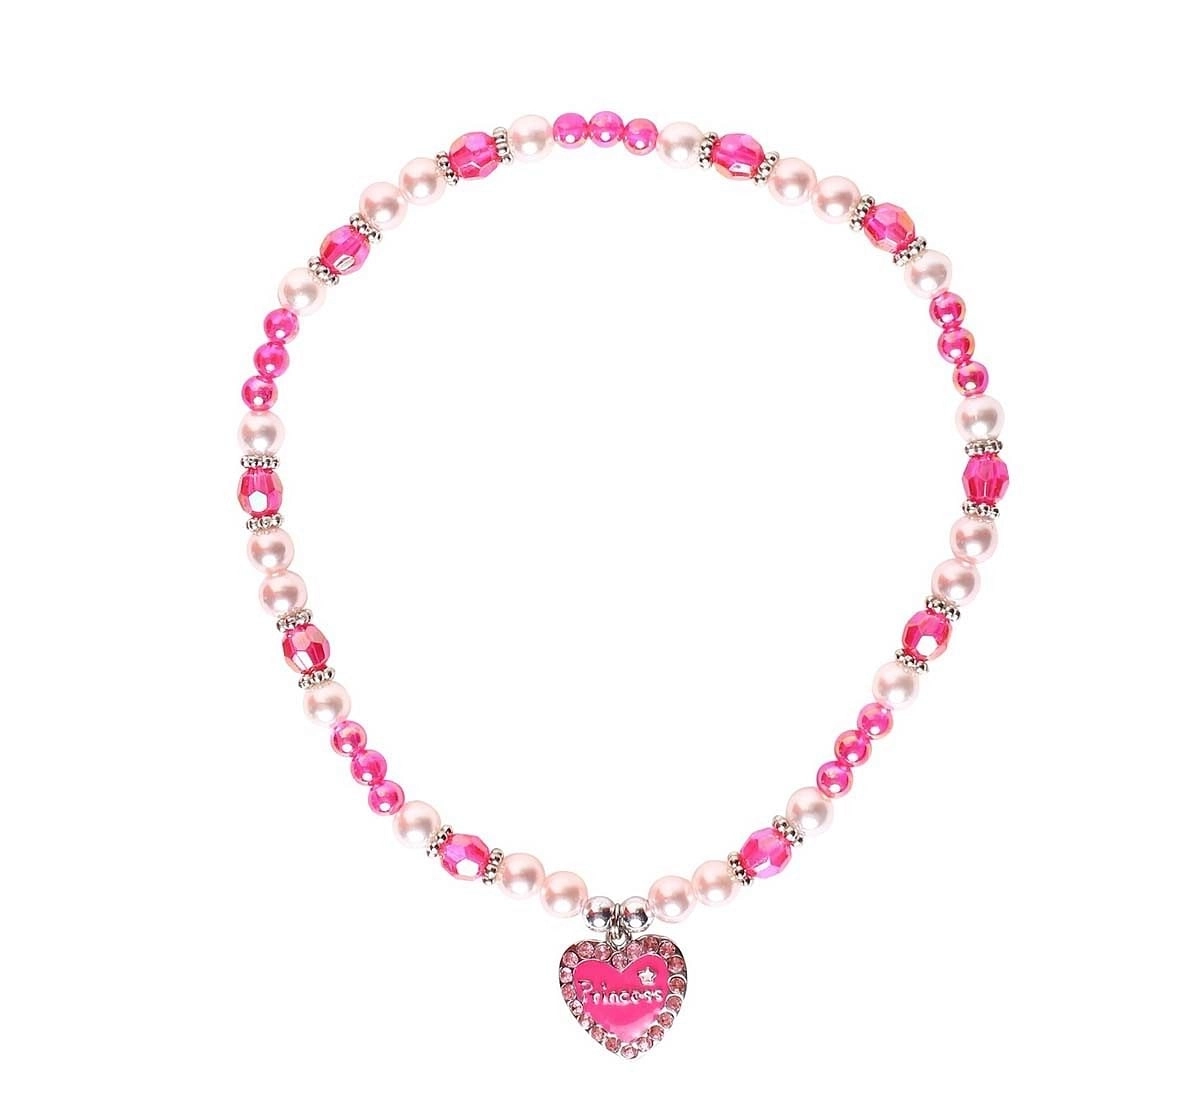 Luvley Pink Poppy High Tea Princess Necklace Accessories for age 3Y+ 